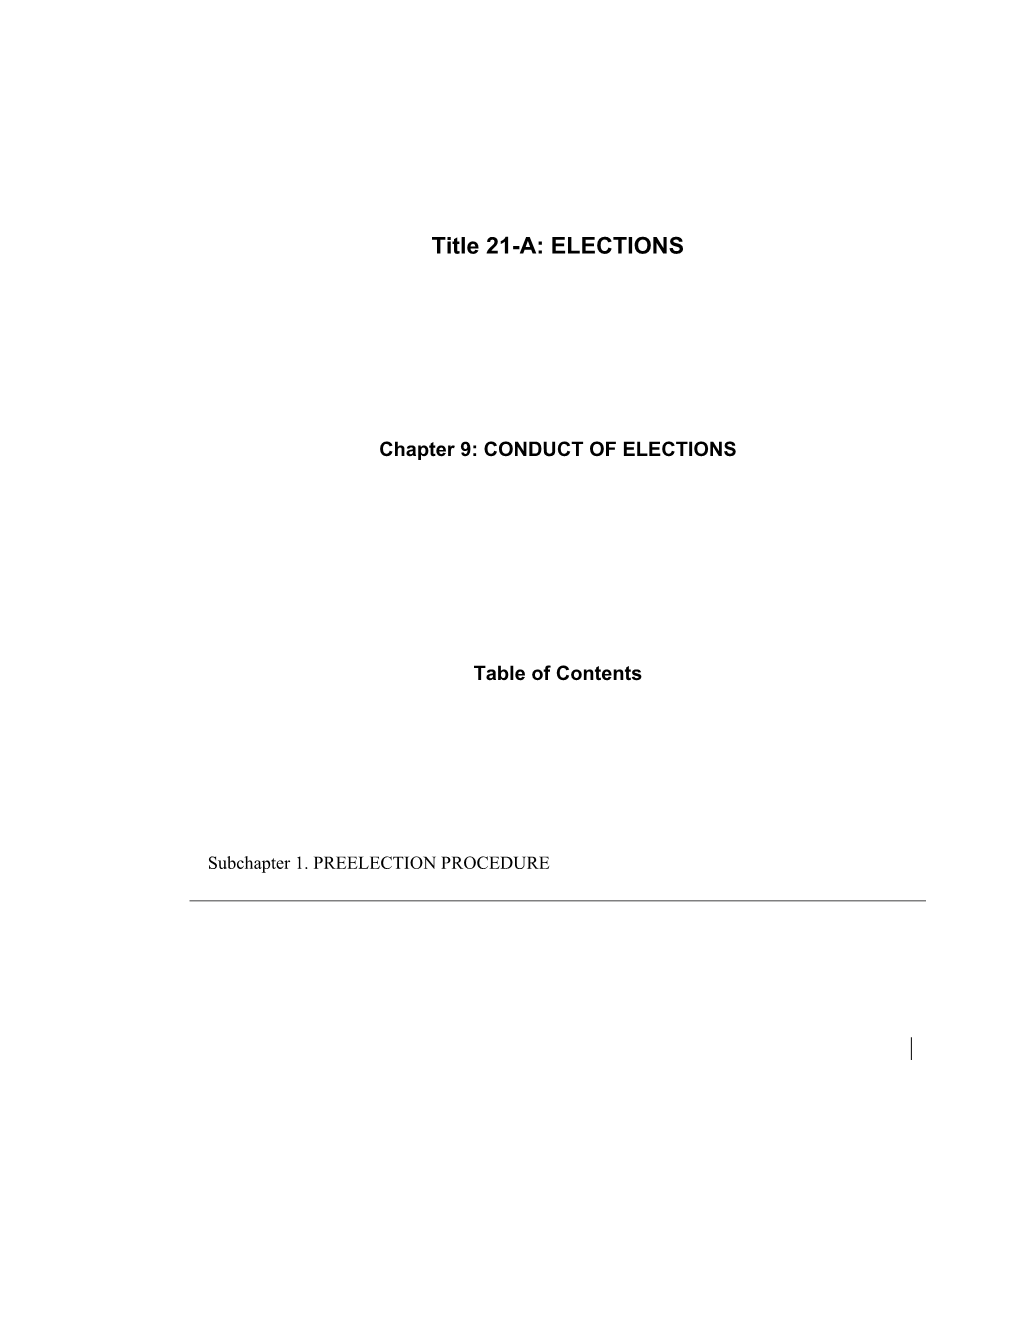 MRS Title 21-A, Chapter9: CONDUCT of ELECTIONS